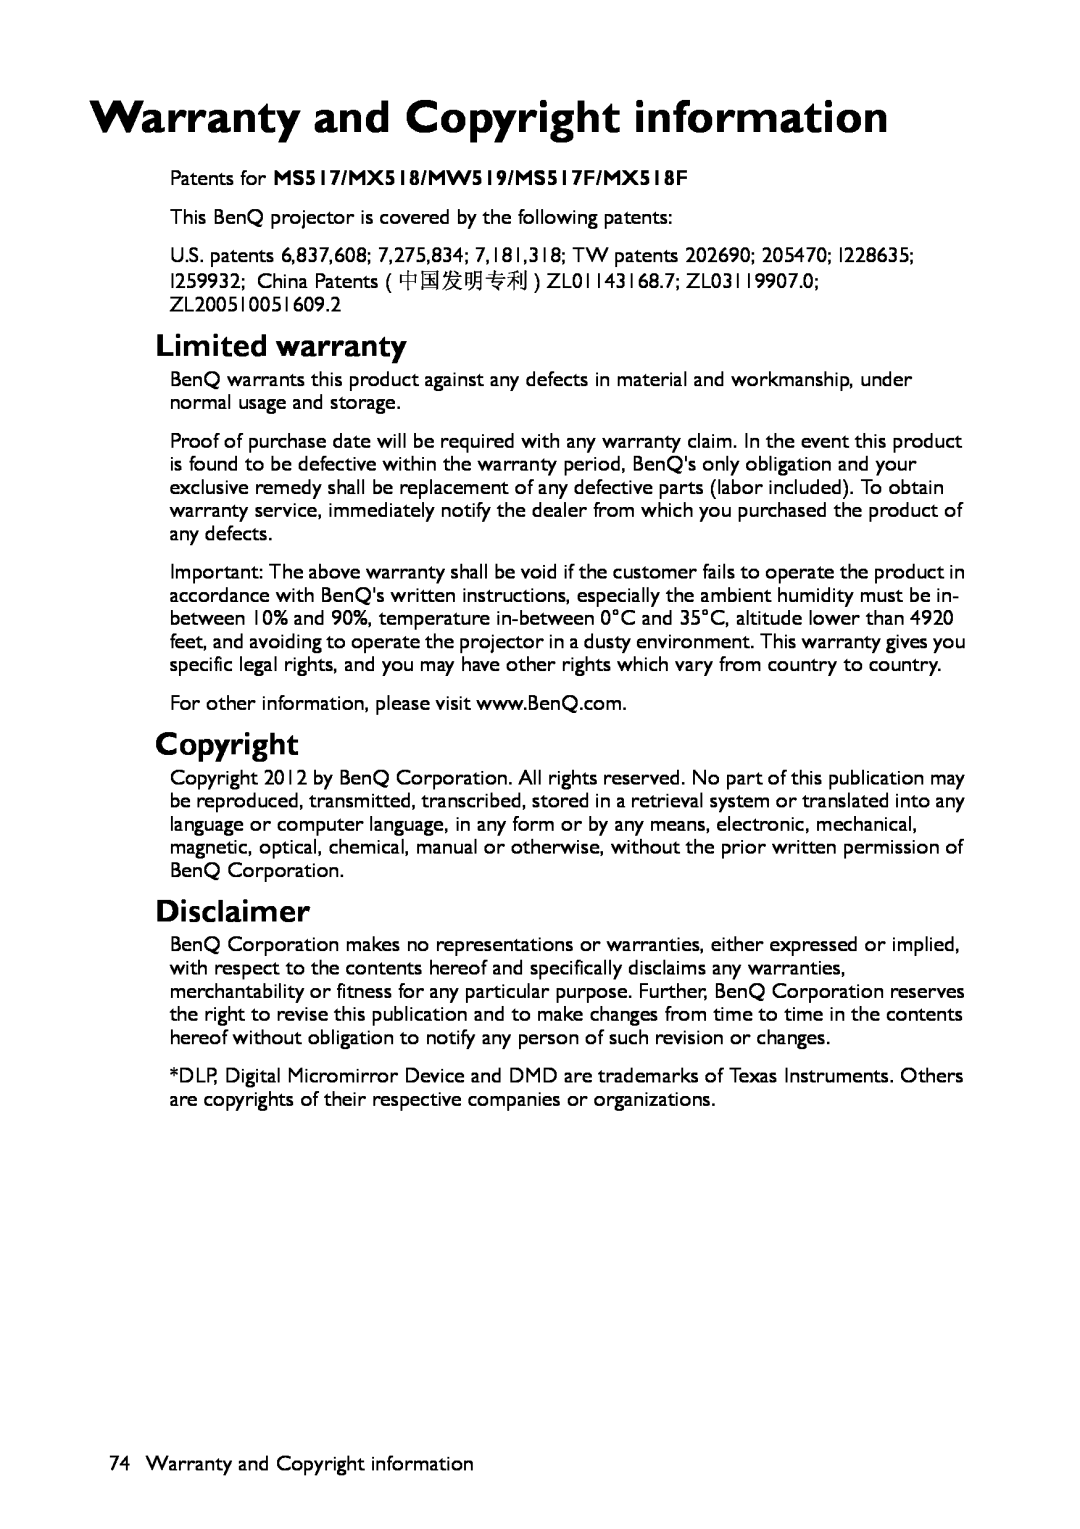 BenQ MS517 user manual Warranty and Copyright information, Limited warranty, Disclaimer 